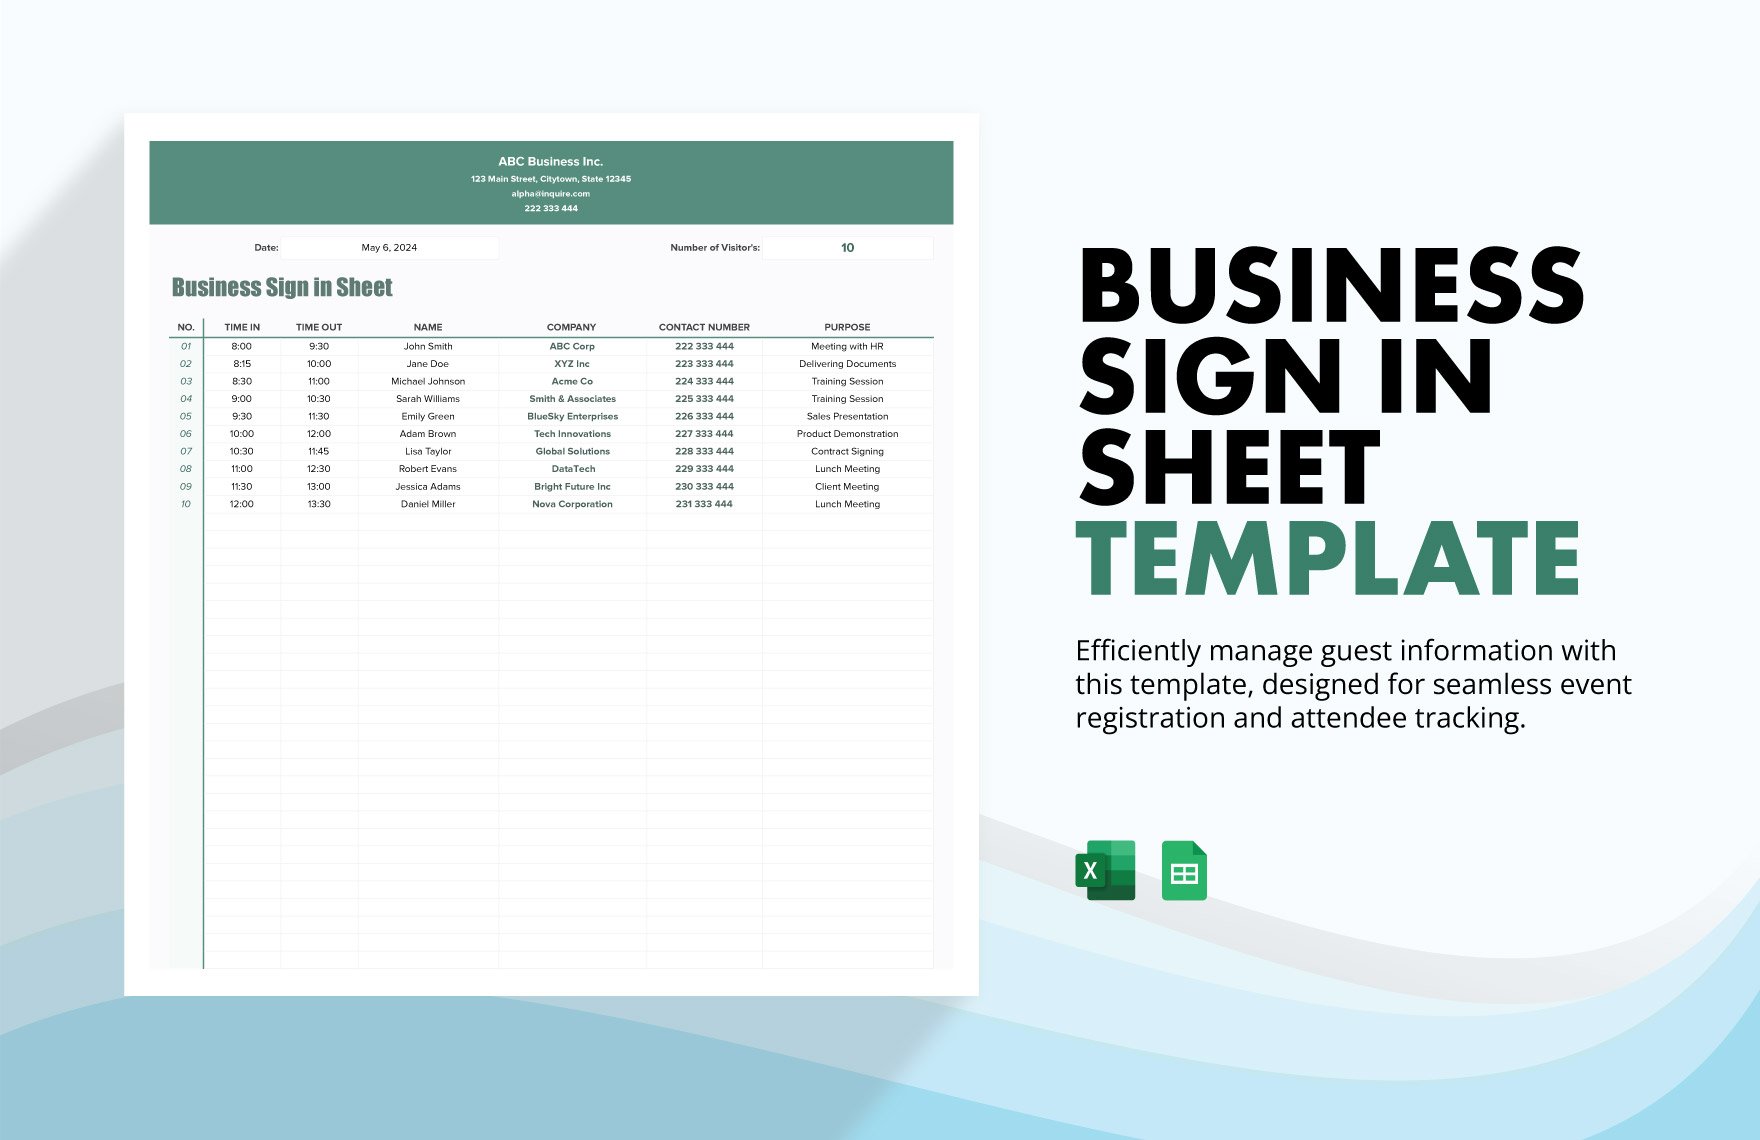 Business Sign in Sheet Template in Excel, Google Sheets